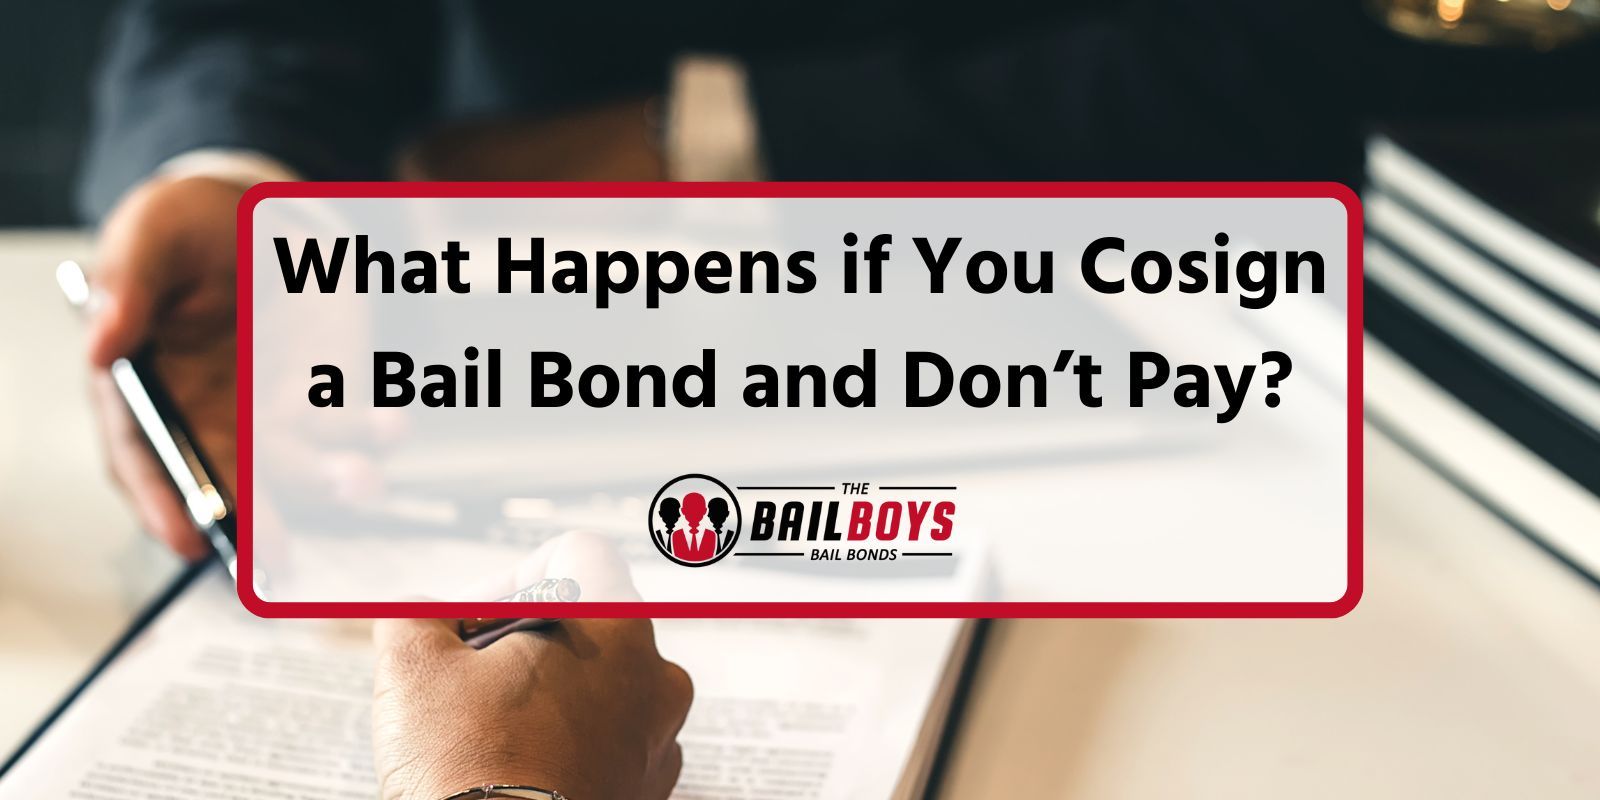 What Happens If You Cosign a Bail Bond and Don't Pay?